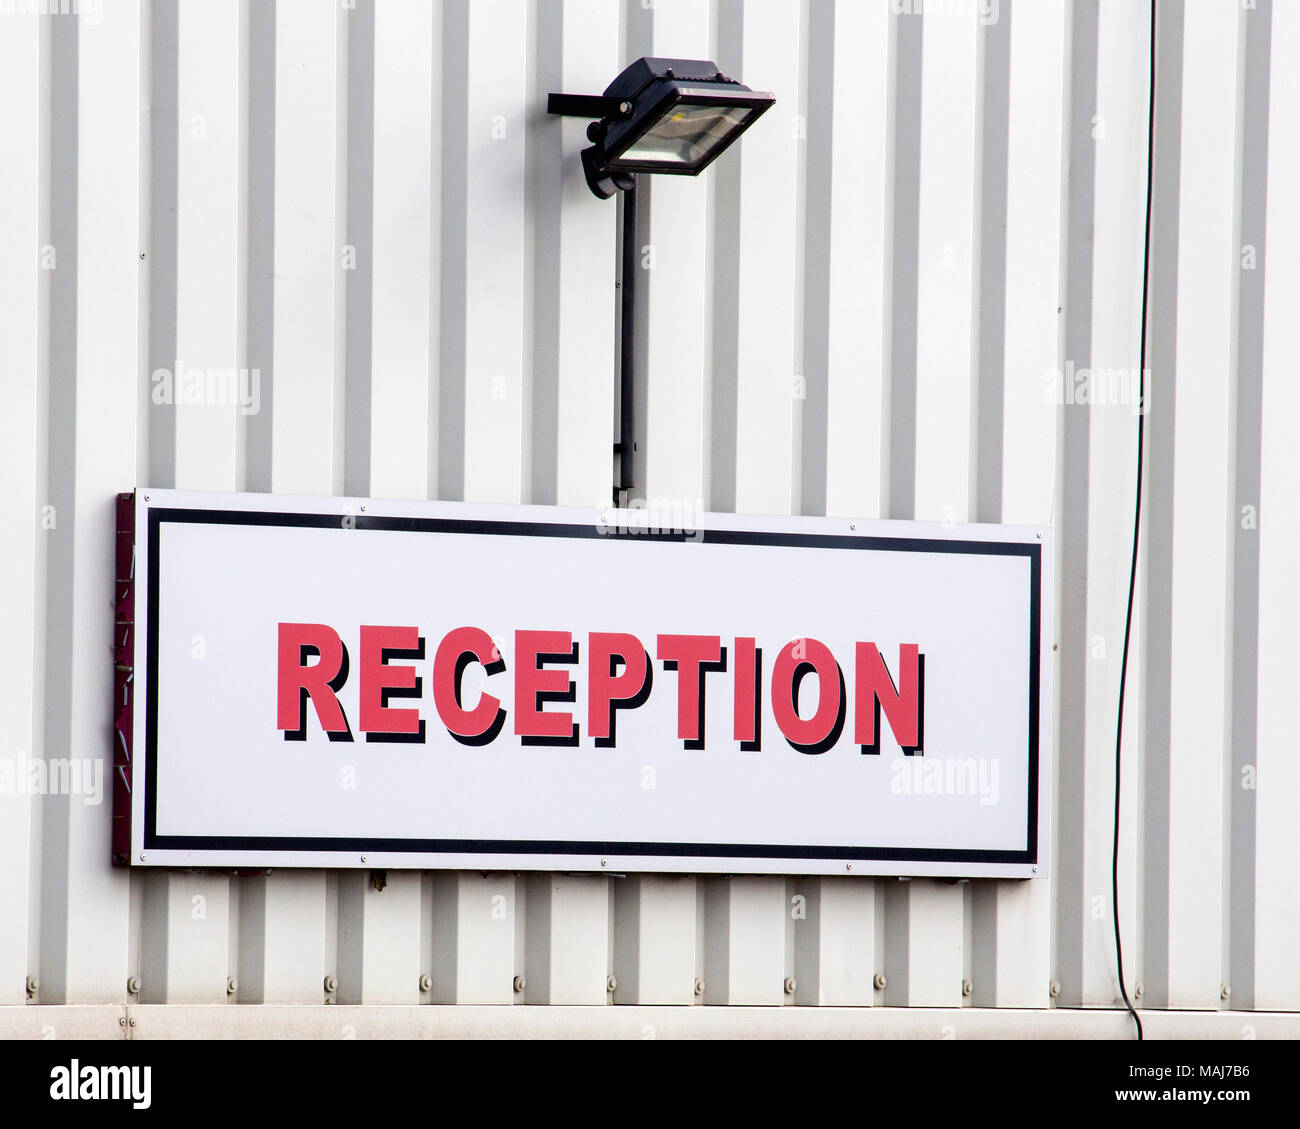 Reception sign above industrial unit office entrance Stock Photo